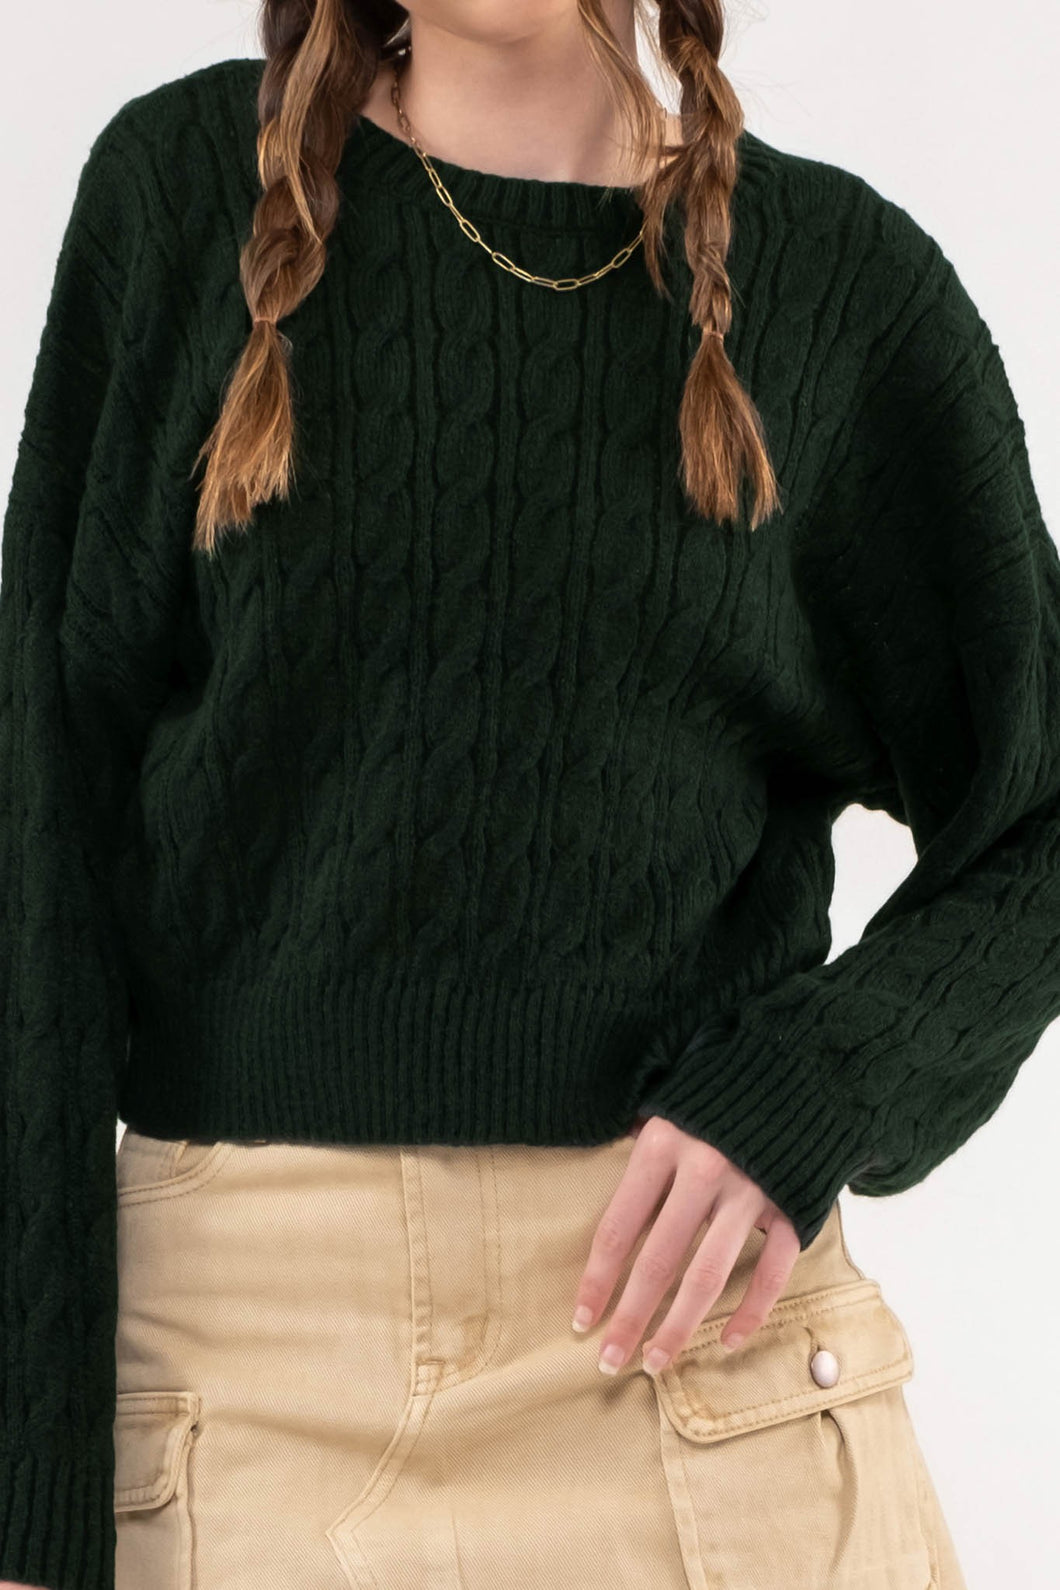 NF Hunter Green Cable Knit Sweater